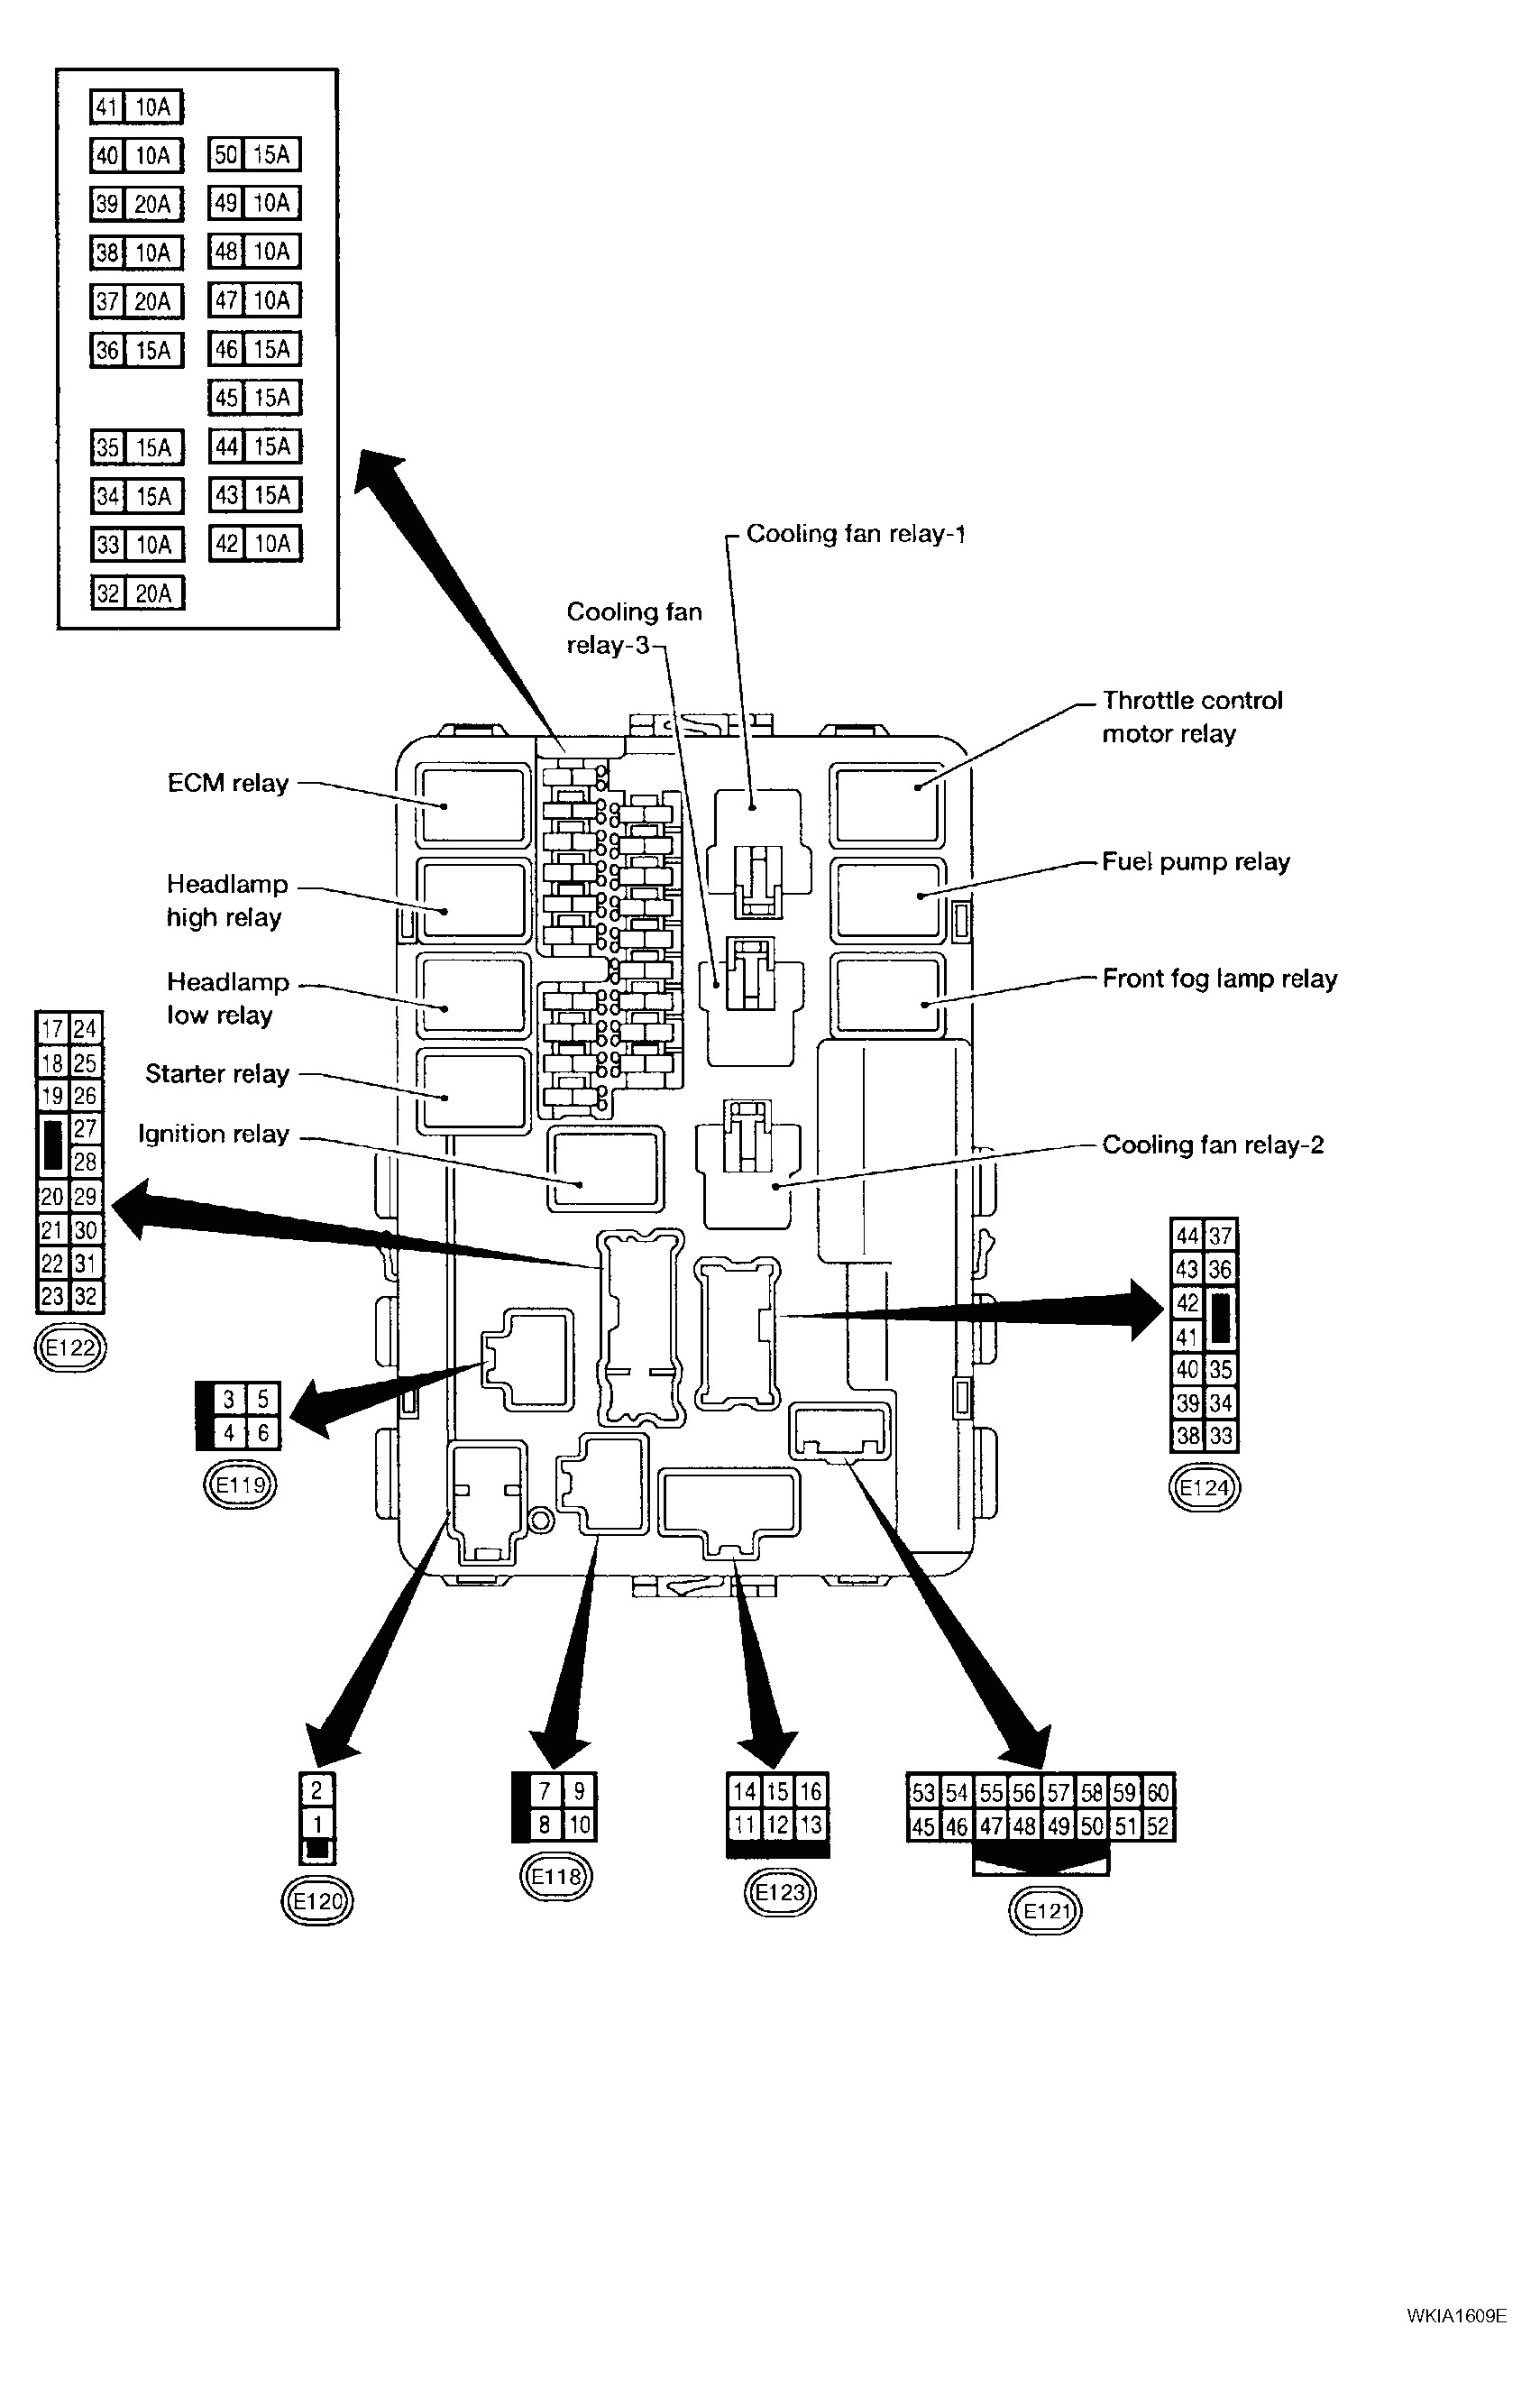 2002 Nissan Frontier Engine Diagram Altima Fuse Diagram Another Blog About Wiring Diagram • Of 2002 Nissan Frontier Engine Diagram